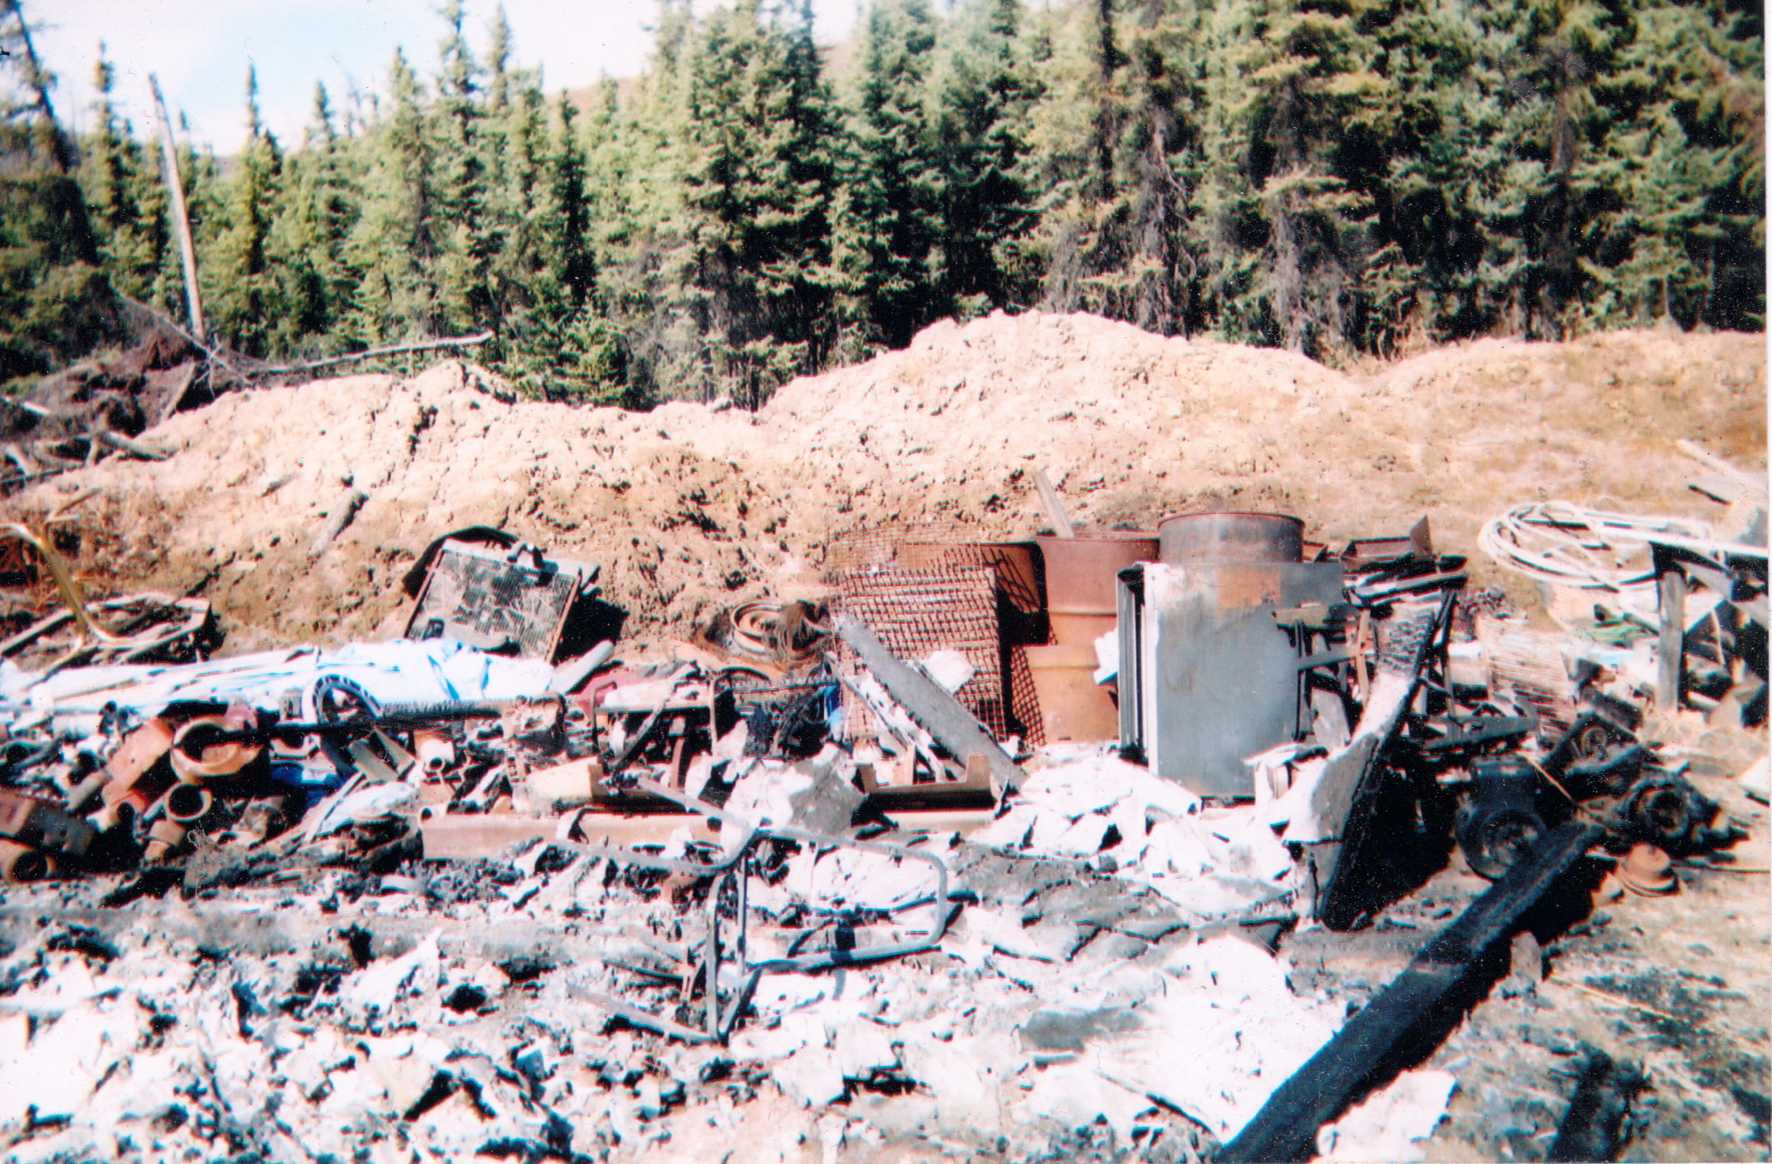 Thease men Burnt Down My Mining Camp and Distroyed all our equipment and Publicly Owned Charity Assets and the DNR Helped them get away with it.